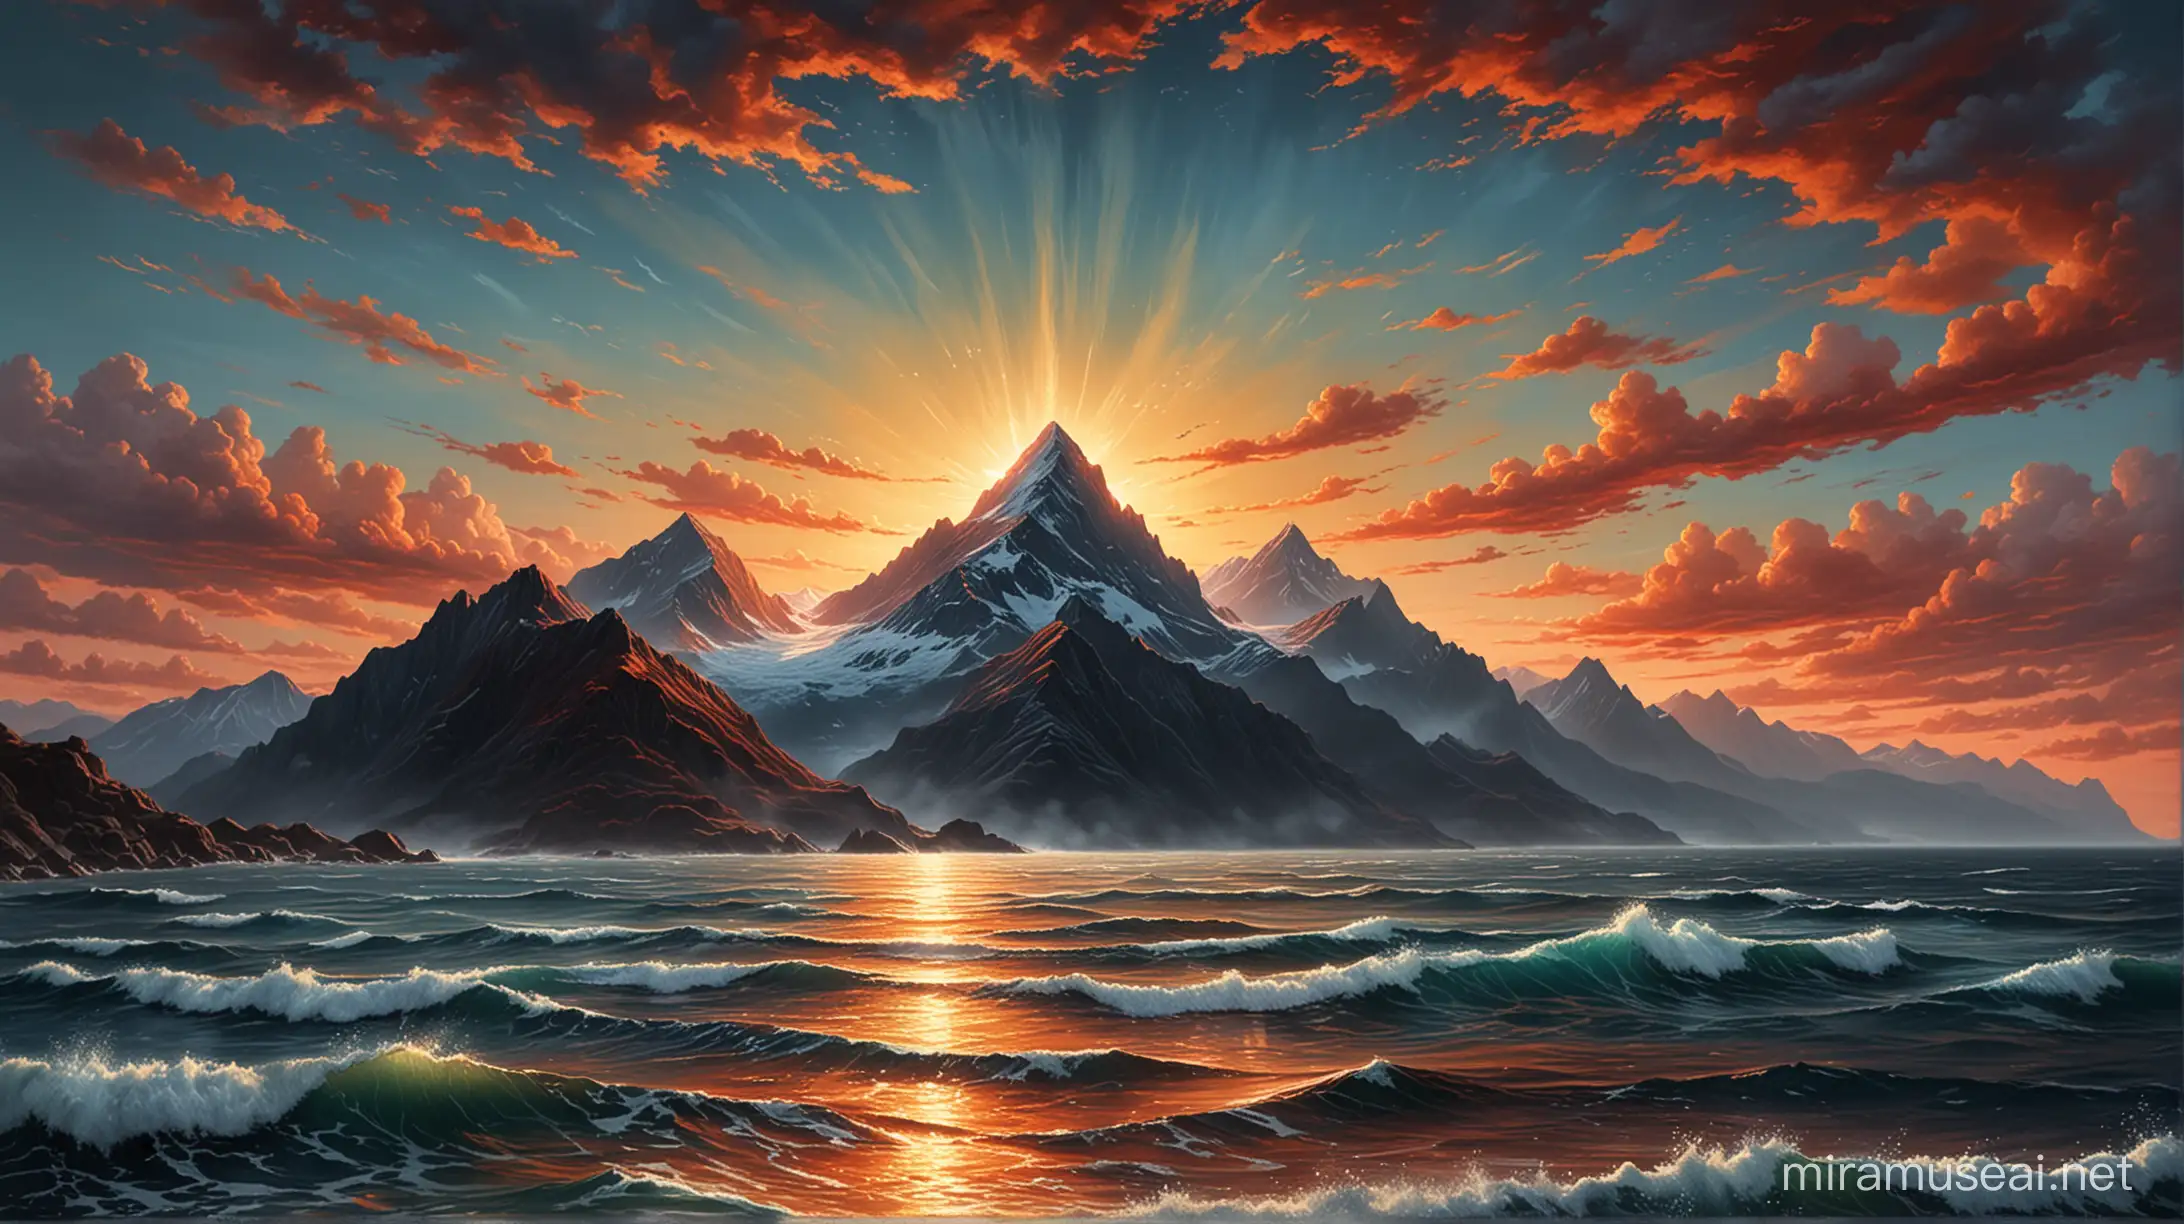 Realistic Sunset Painting Dramatic Sky Over Ocean with Mountain Silhouette